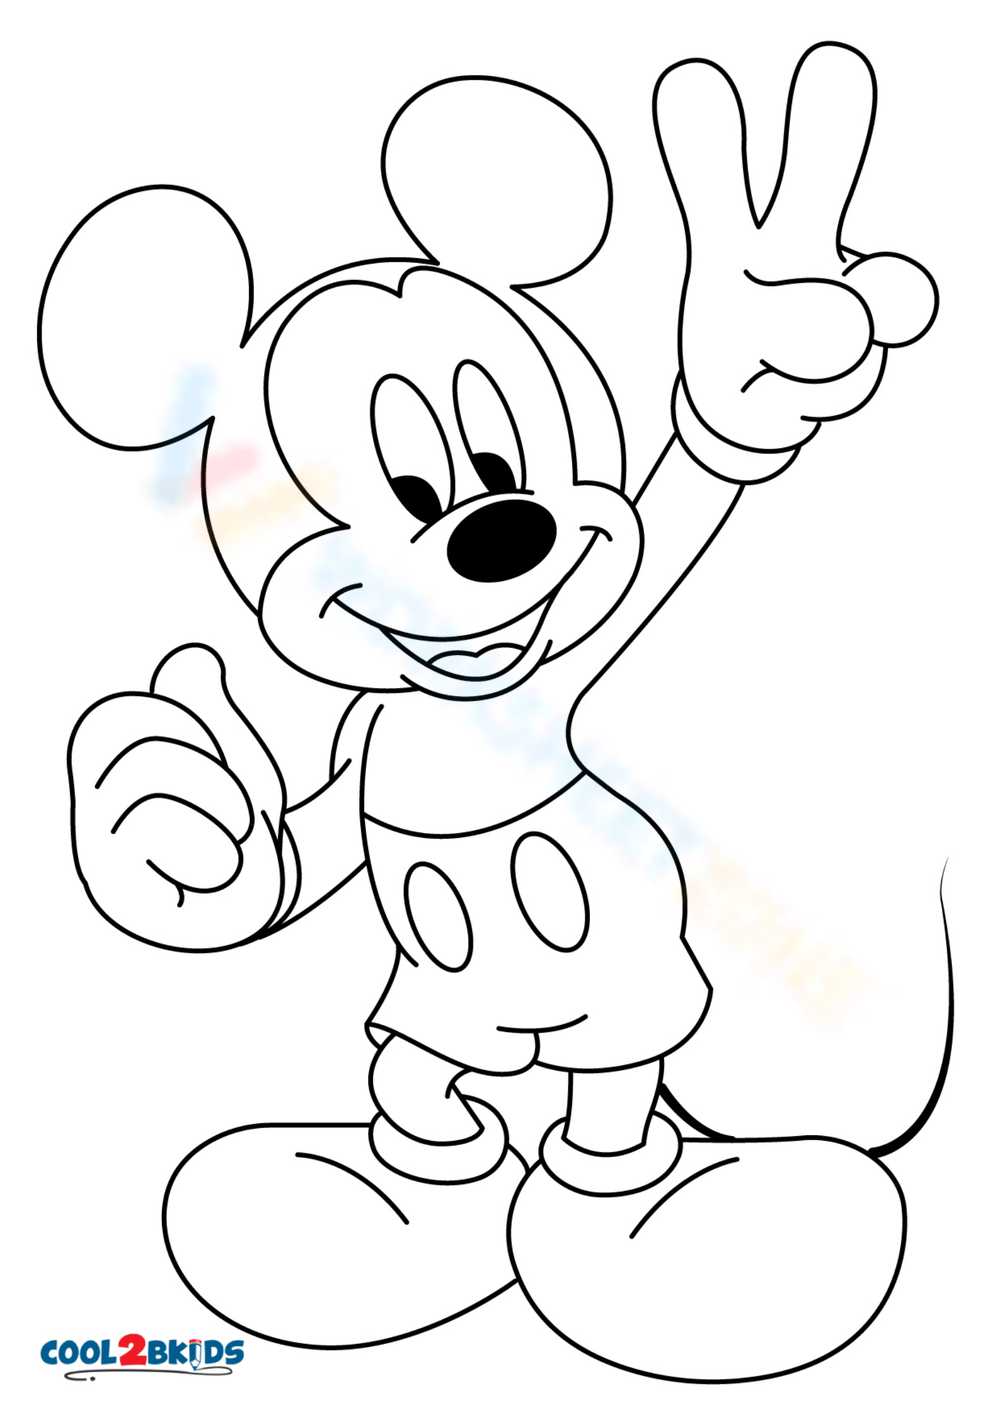 Search results for: 'Mickey+Mouse +Hello+Colouring+Set+5+in+1+Giga+Block+AS+1023-62686